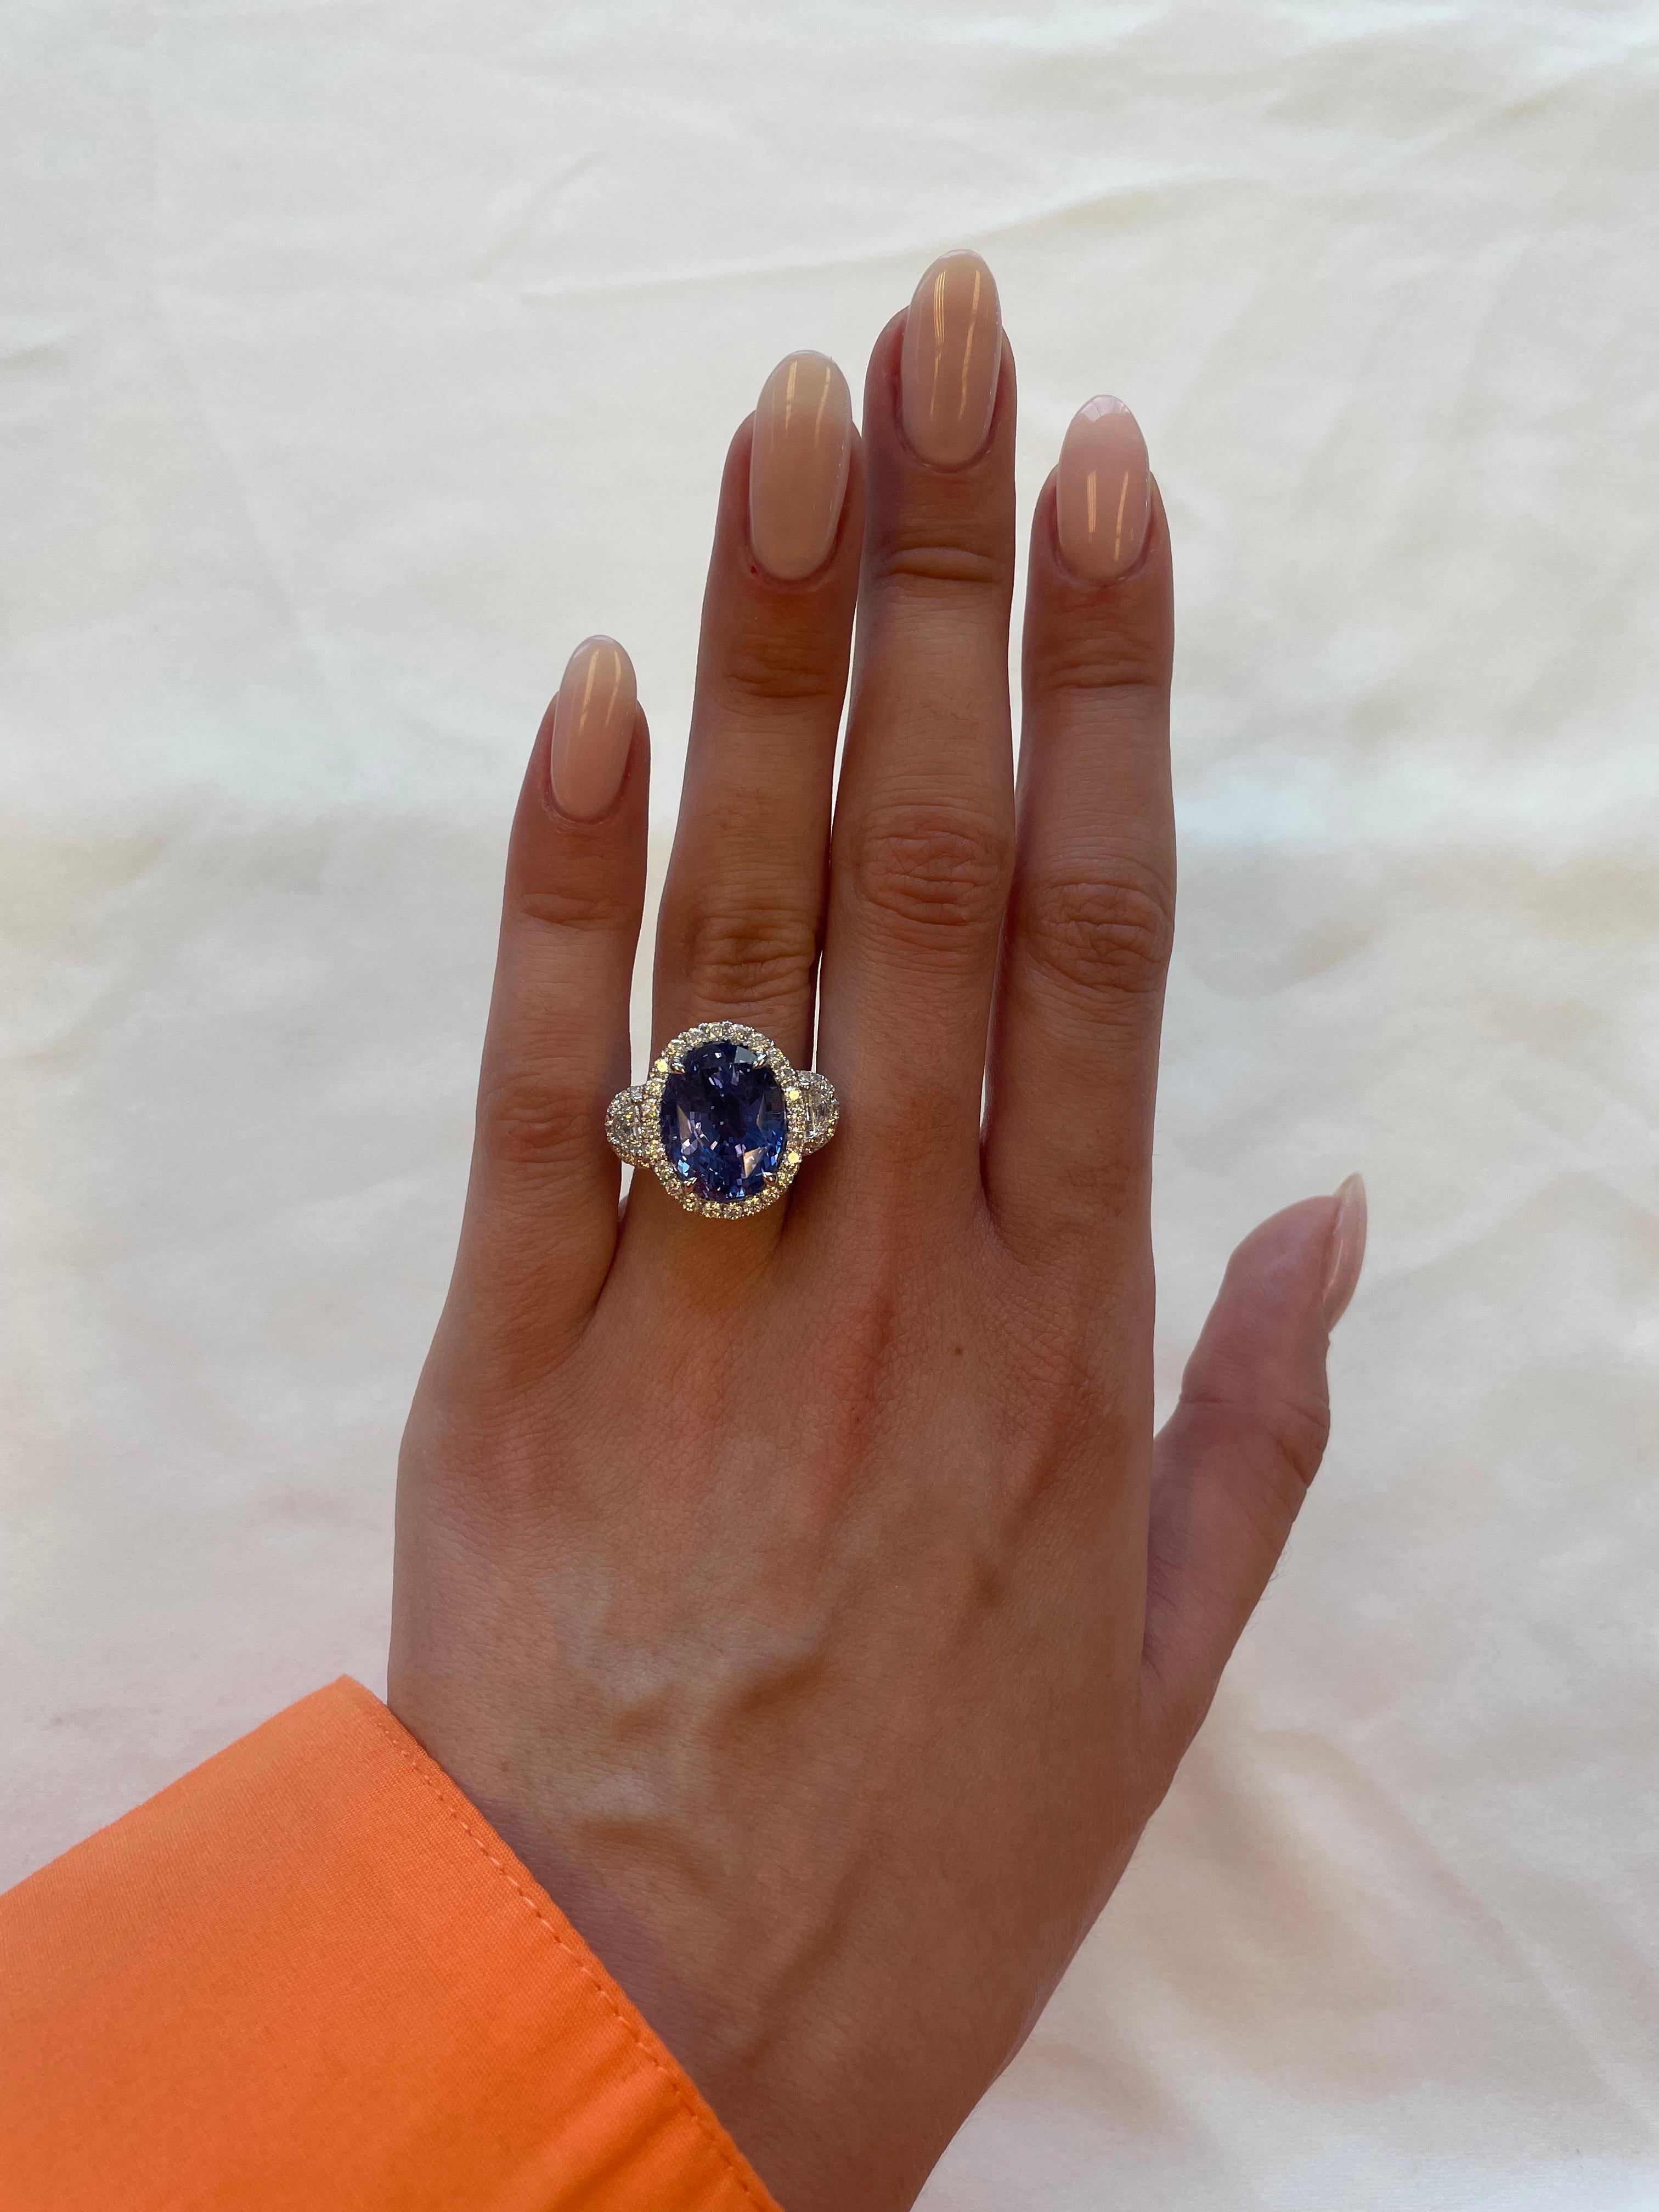 Stunning Ceylon sapphire and diamond halo ring, GIA certified. High jewelry by Alexander Beverly Hills. 
14.47 carats total gemstone weight.
GIA certified 12.05 carat oval sapphire, Sri Lanka (Ceylon) origin, no-heat. Complimented with 2 epaulette